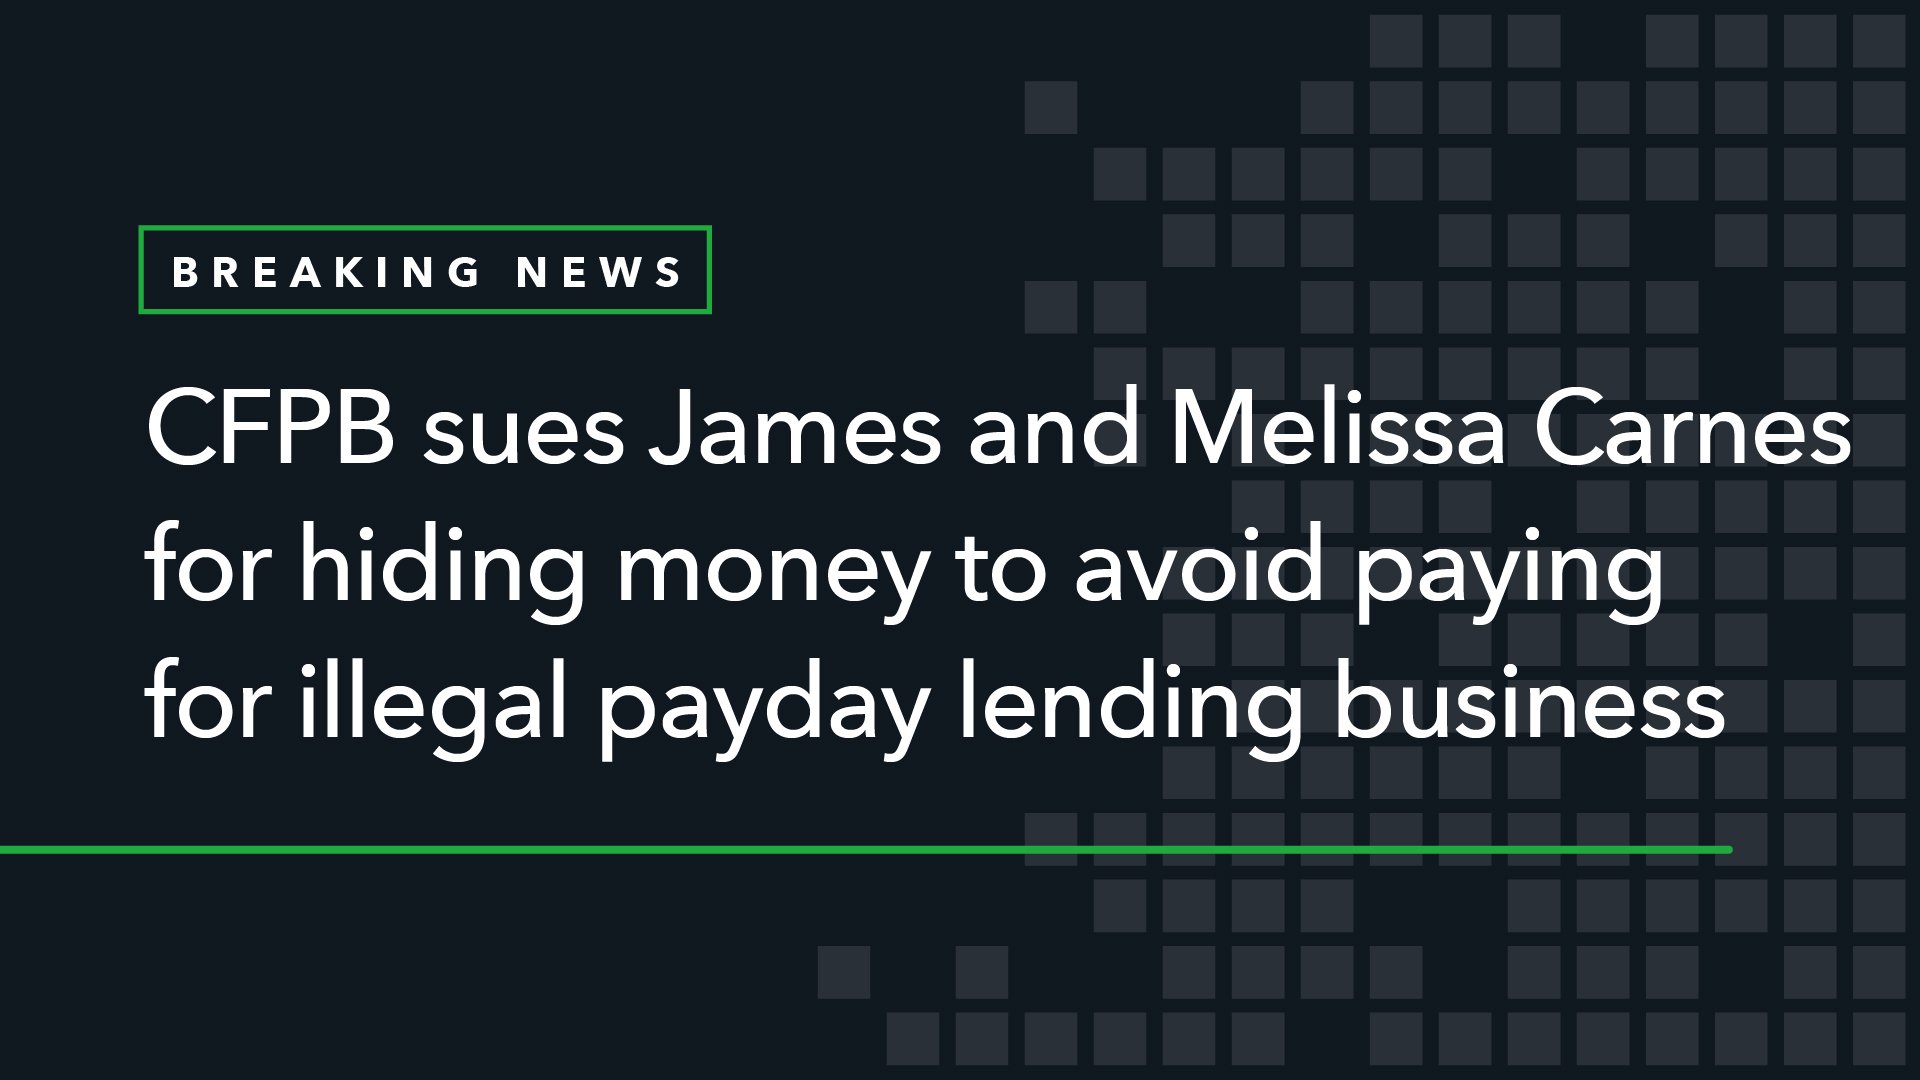 CFPB Sues James Carnes and Melissa Carnes for Hiding Money to Avoid Paying for Illegal Payday Lending Business